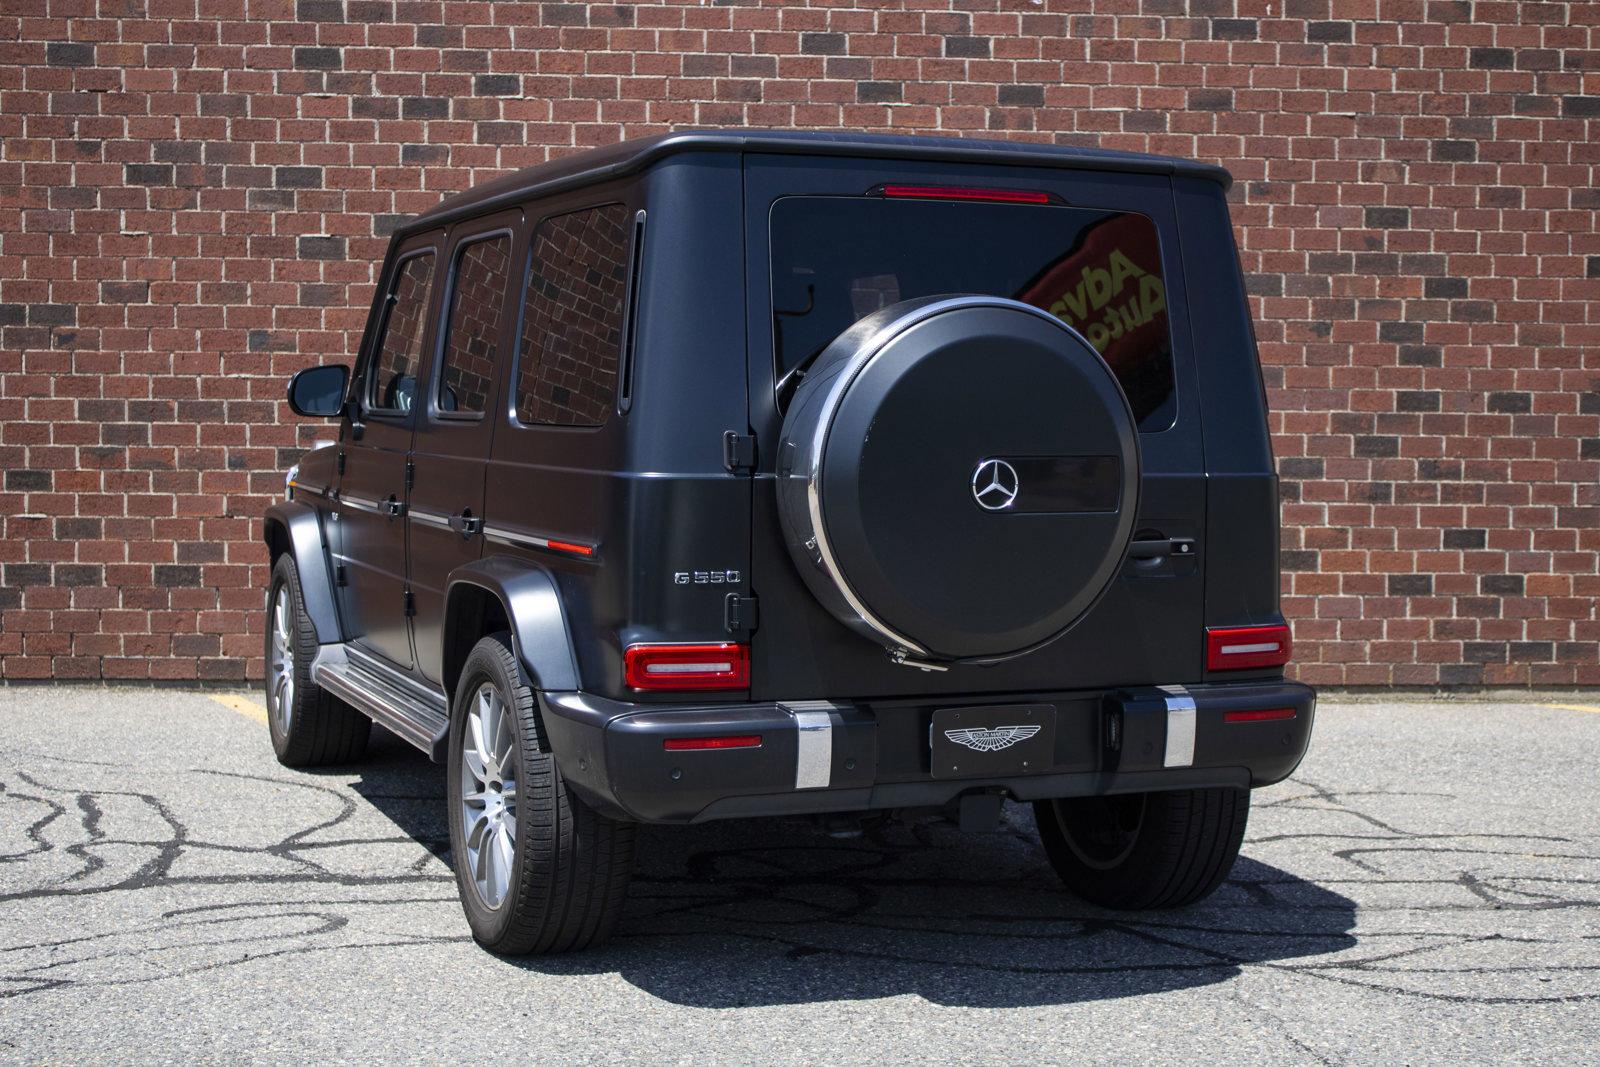 Used 2019 Mercedes-Benz G-Class G550 with VIN WDCYC6BJ0KX322967 for sale in Norwood, MA